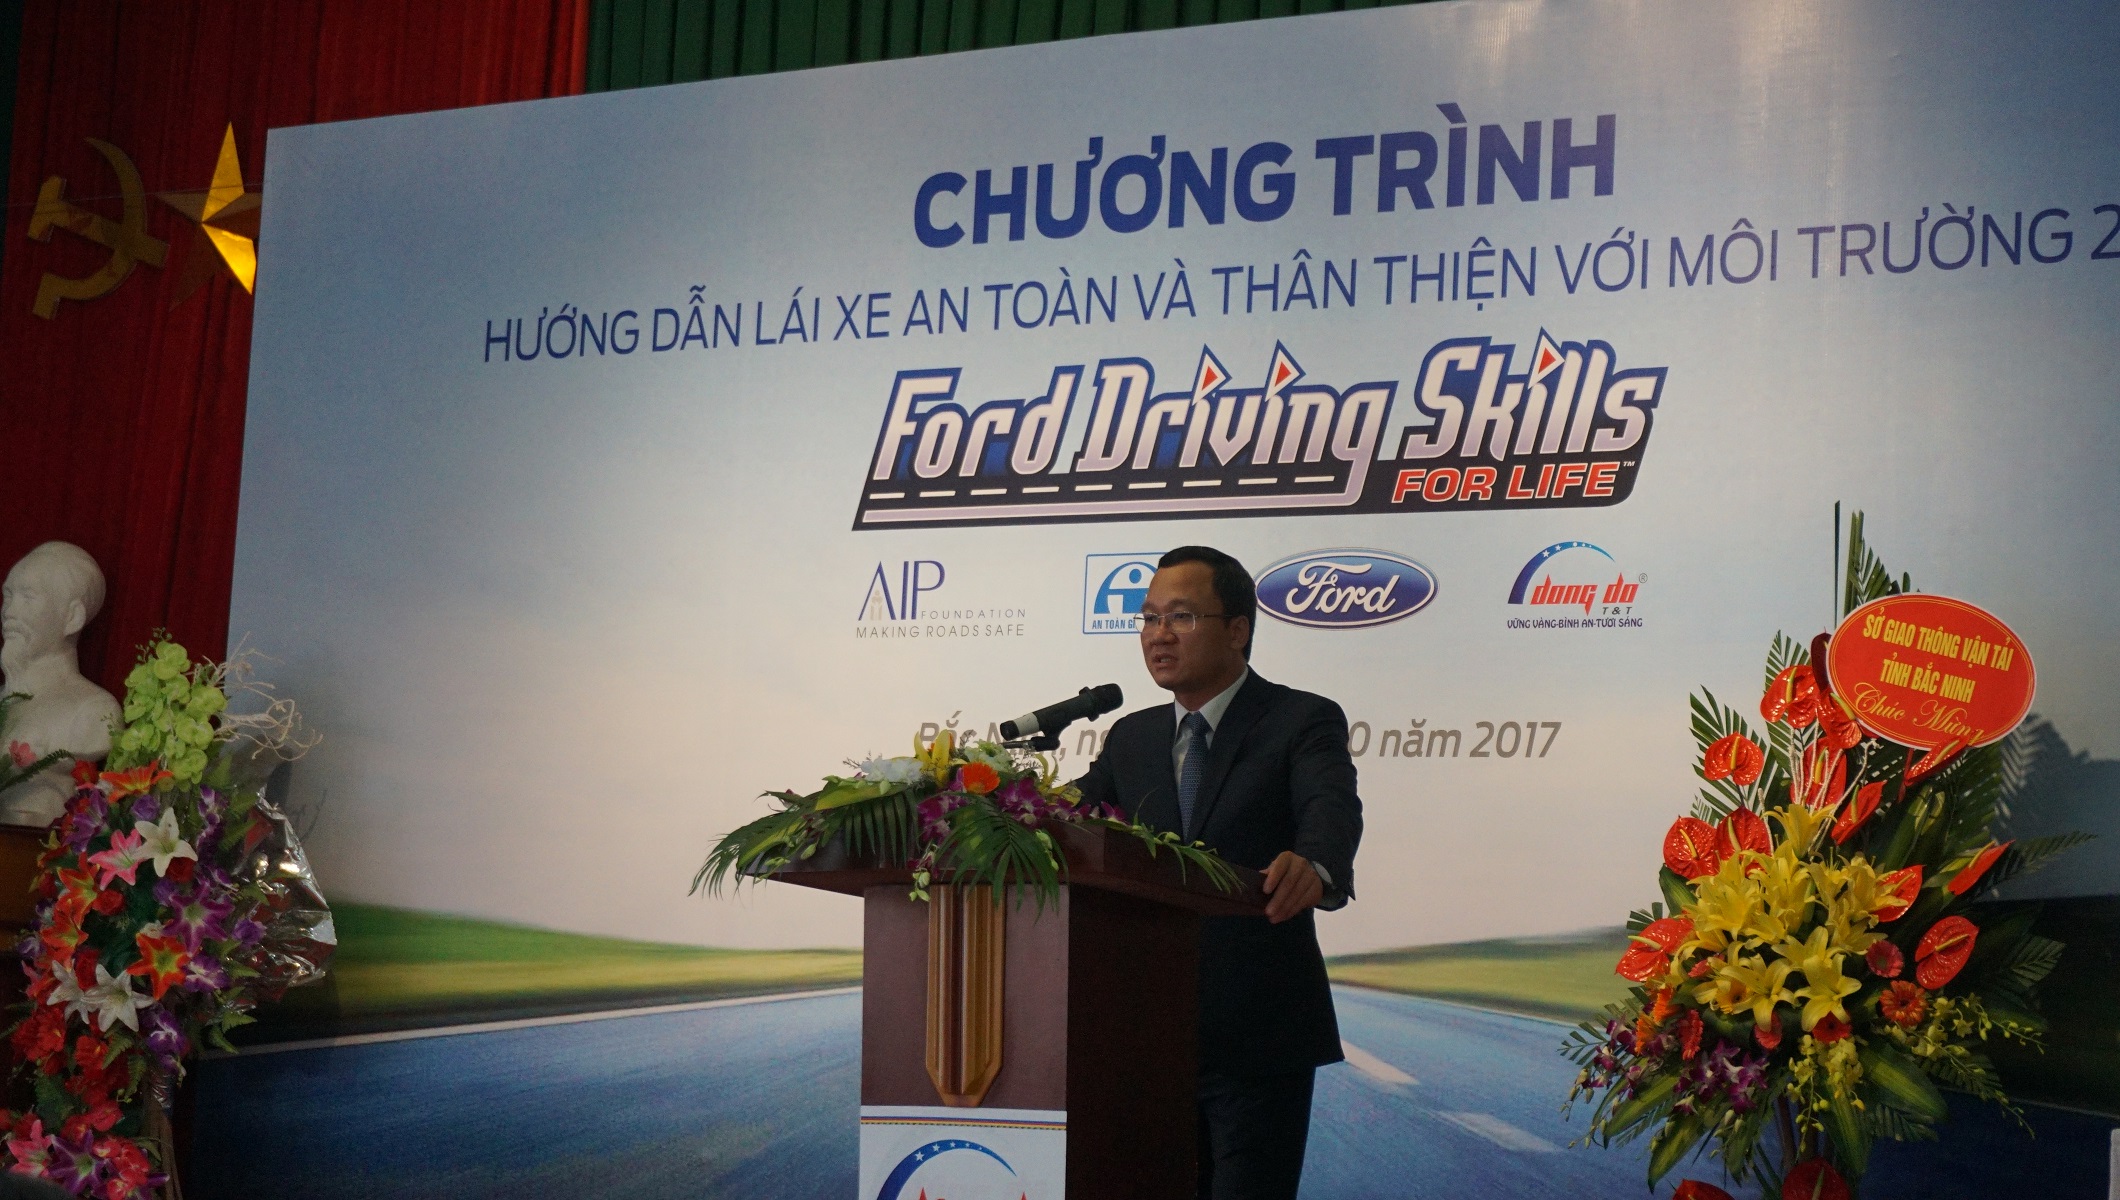 Ford’s continuing efforts to make Vietnam’s roads safer